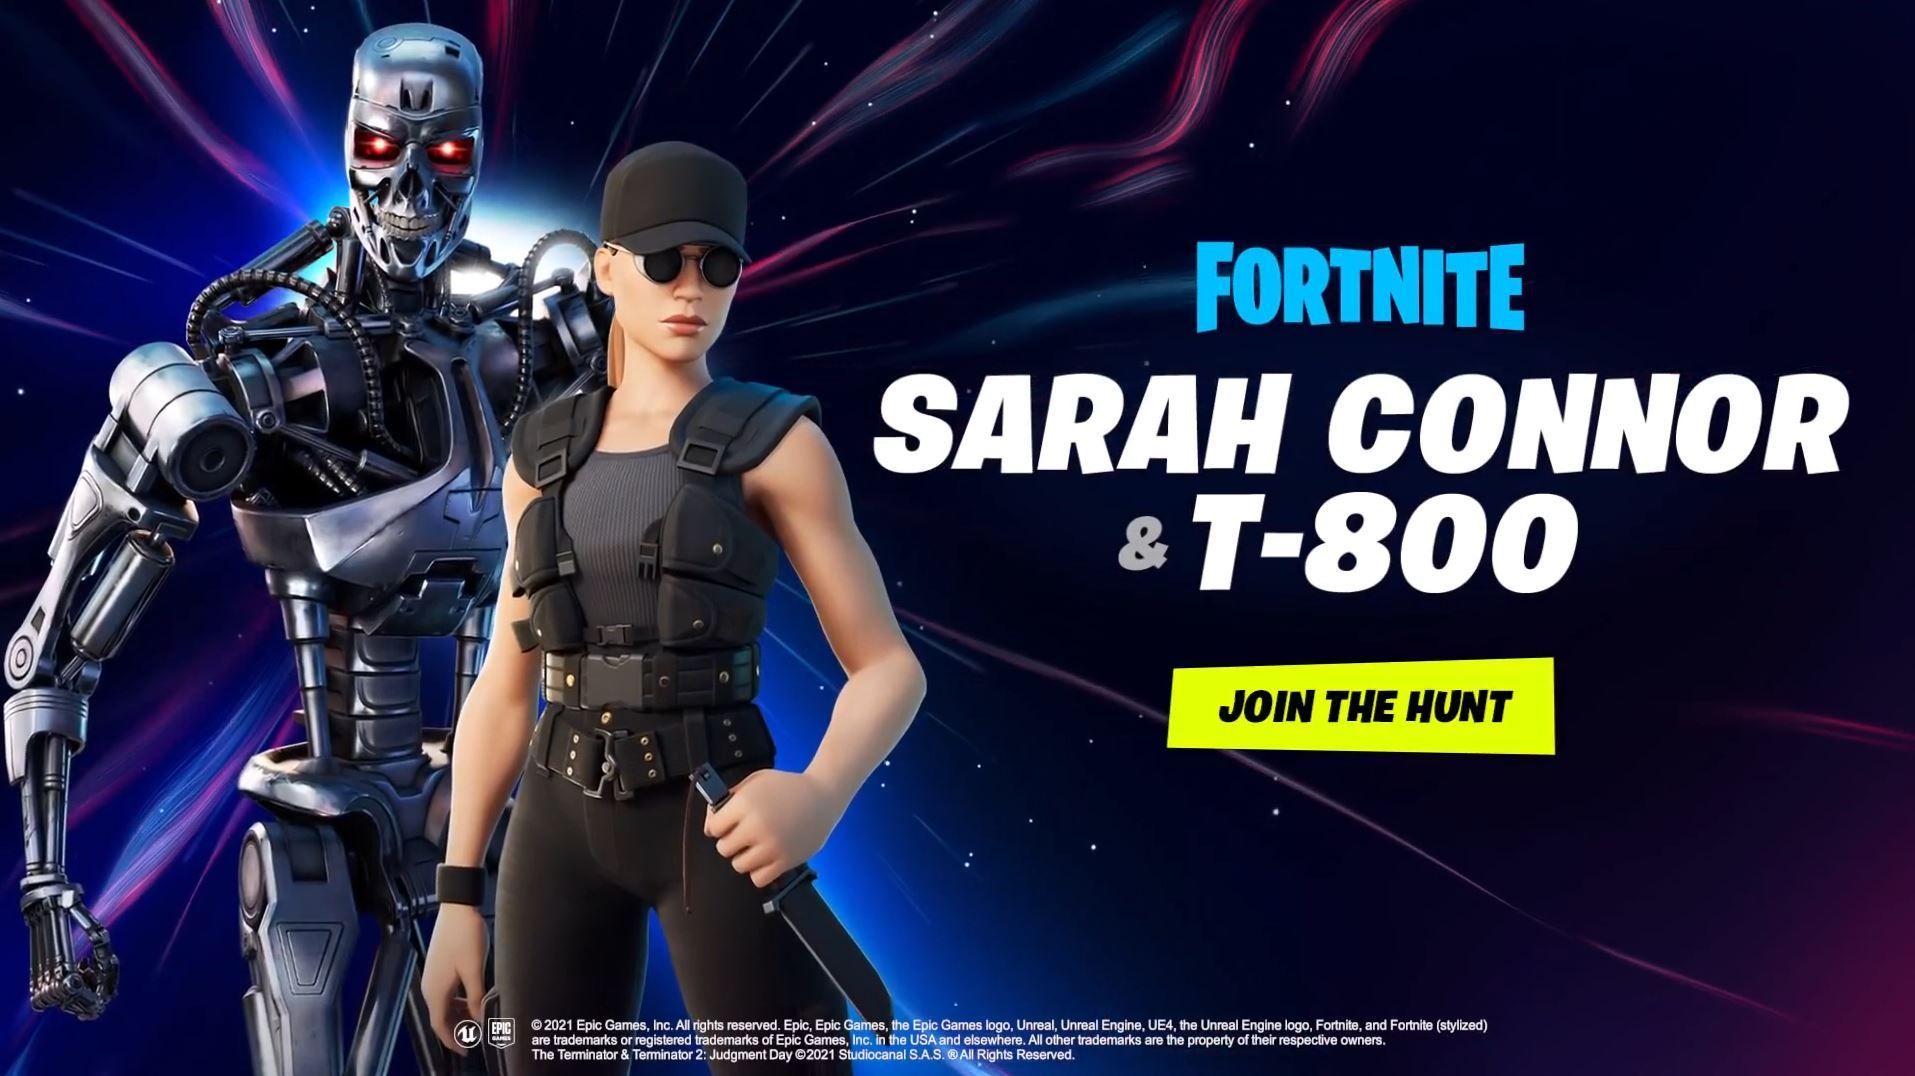 Fortnite Adds Sarah Connor And T-800 To The Item Shop, Available Now For A Limited Time On PS5 And PS4 - PlayStation Universe